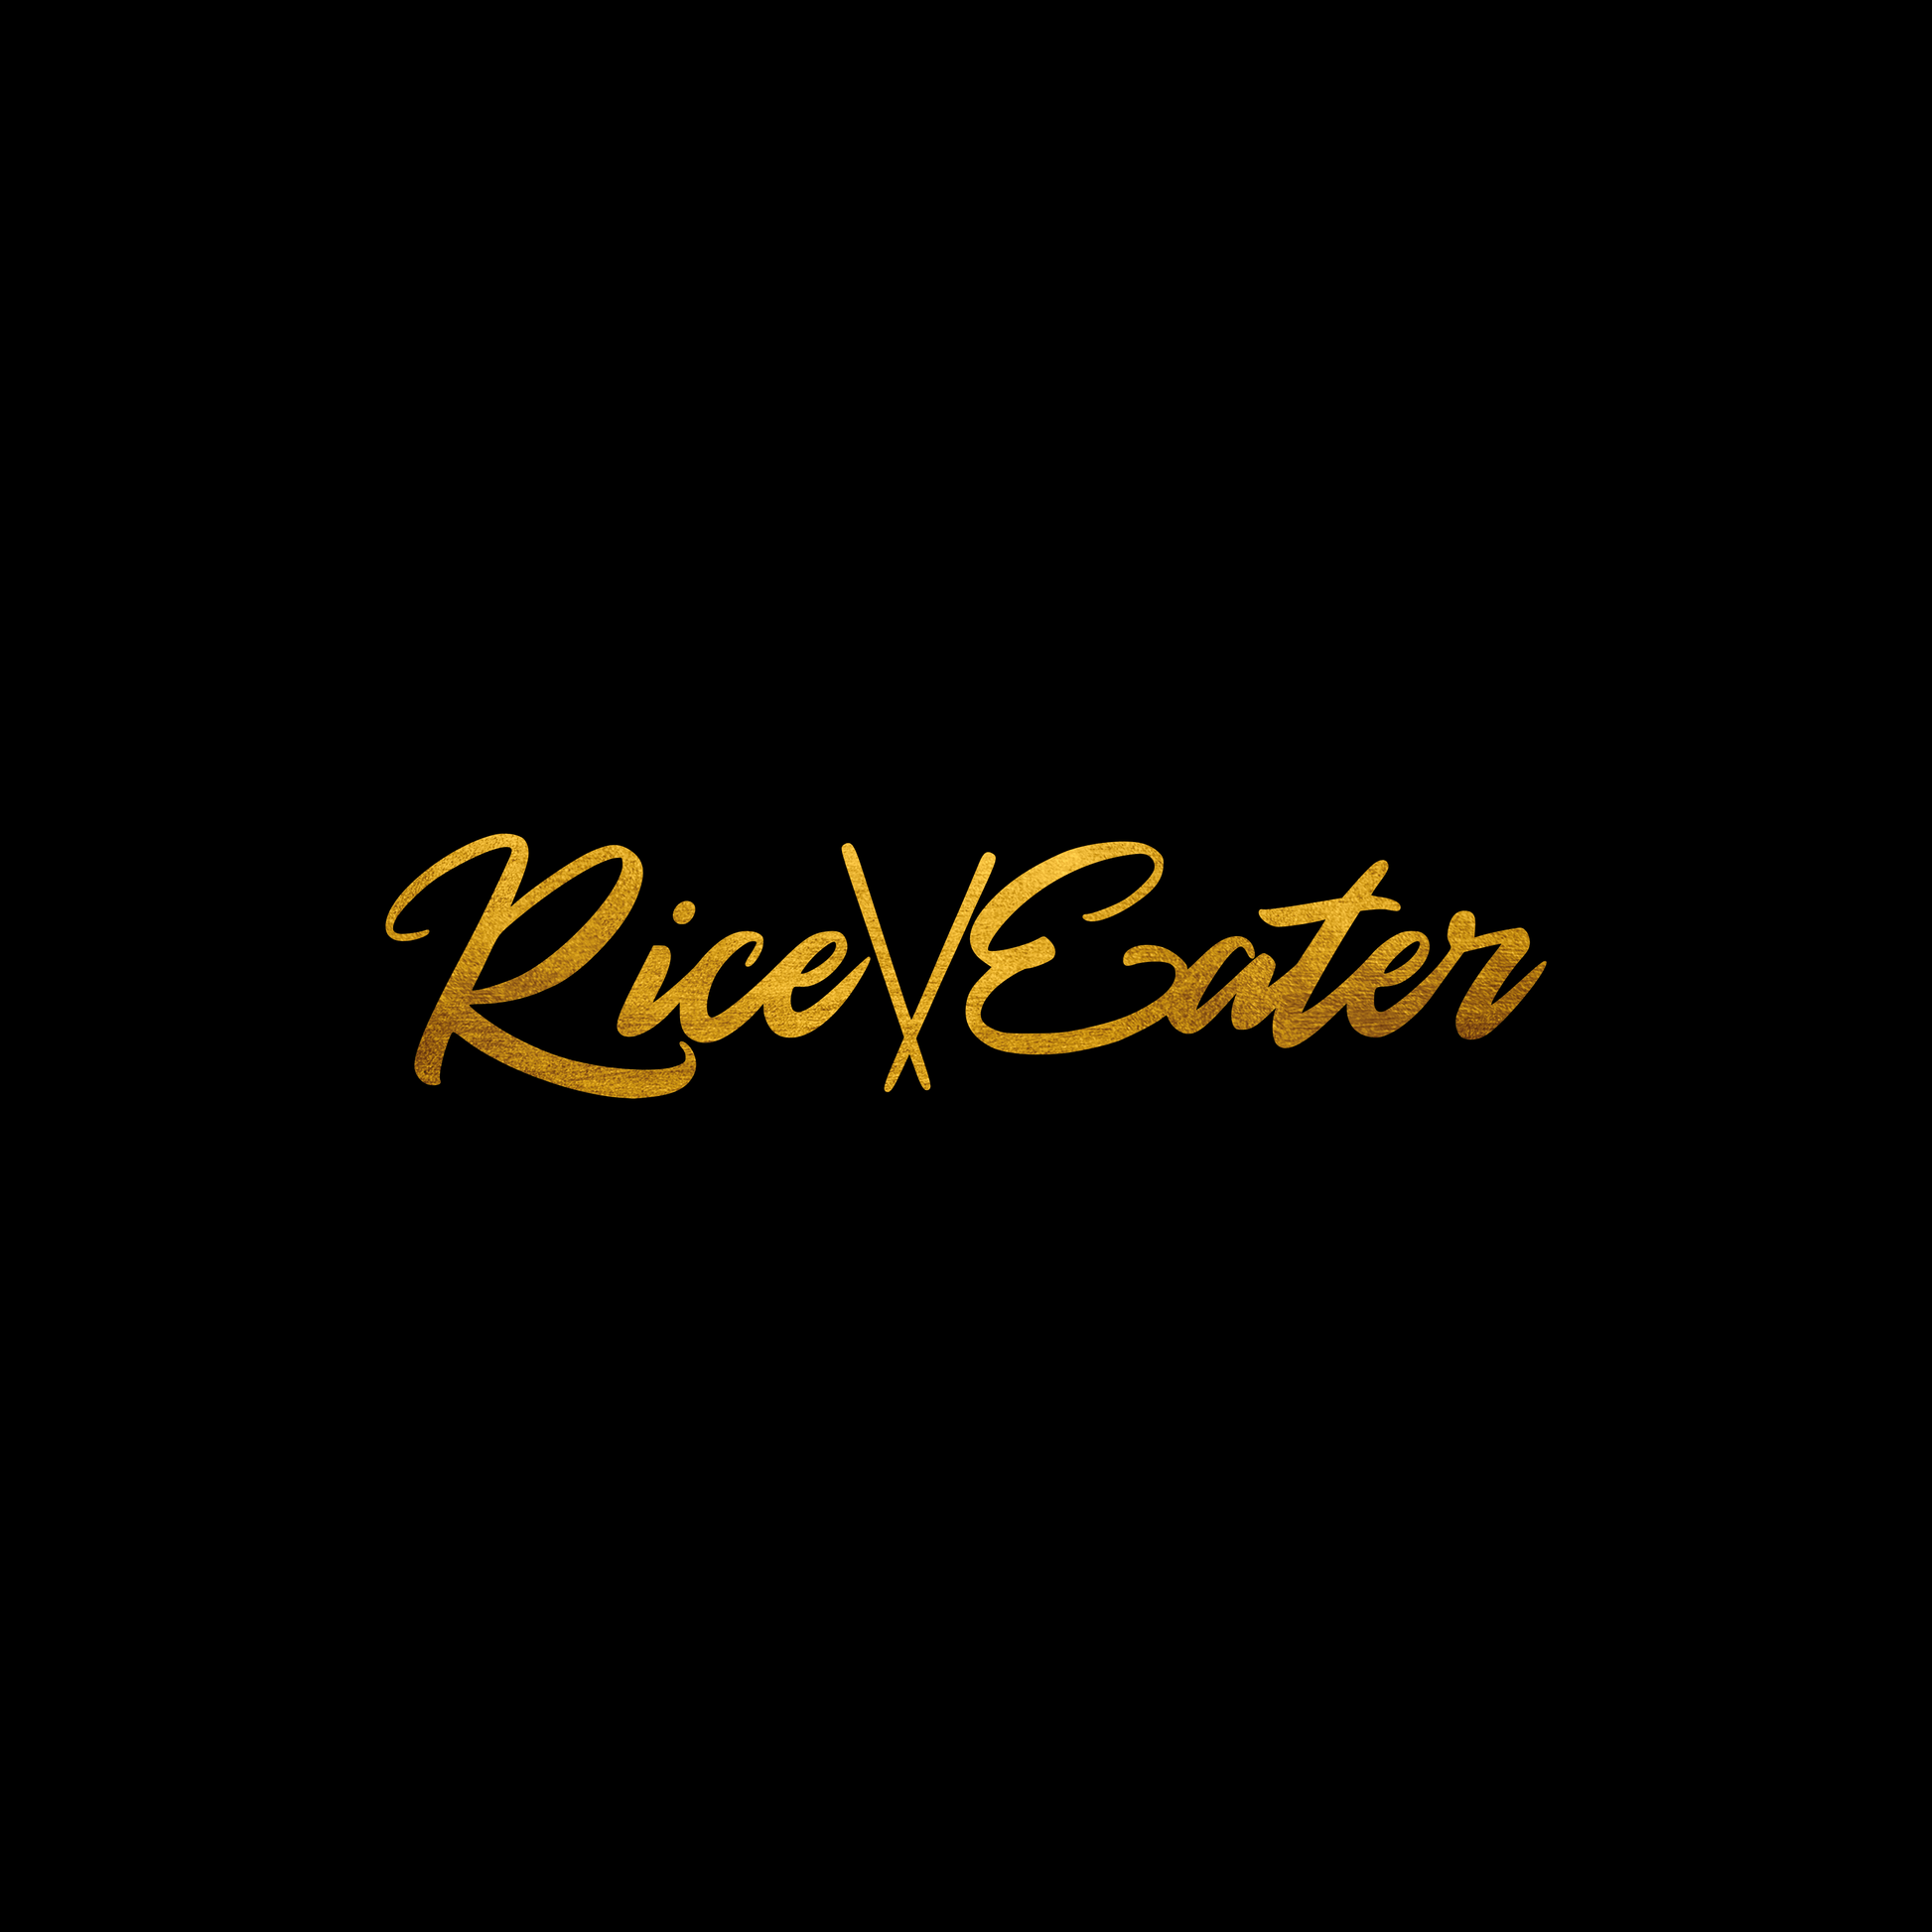 Rice eater sticker decal